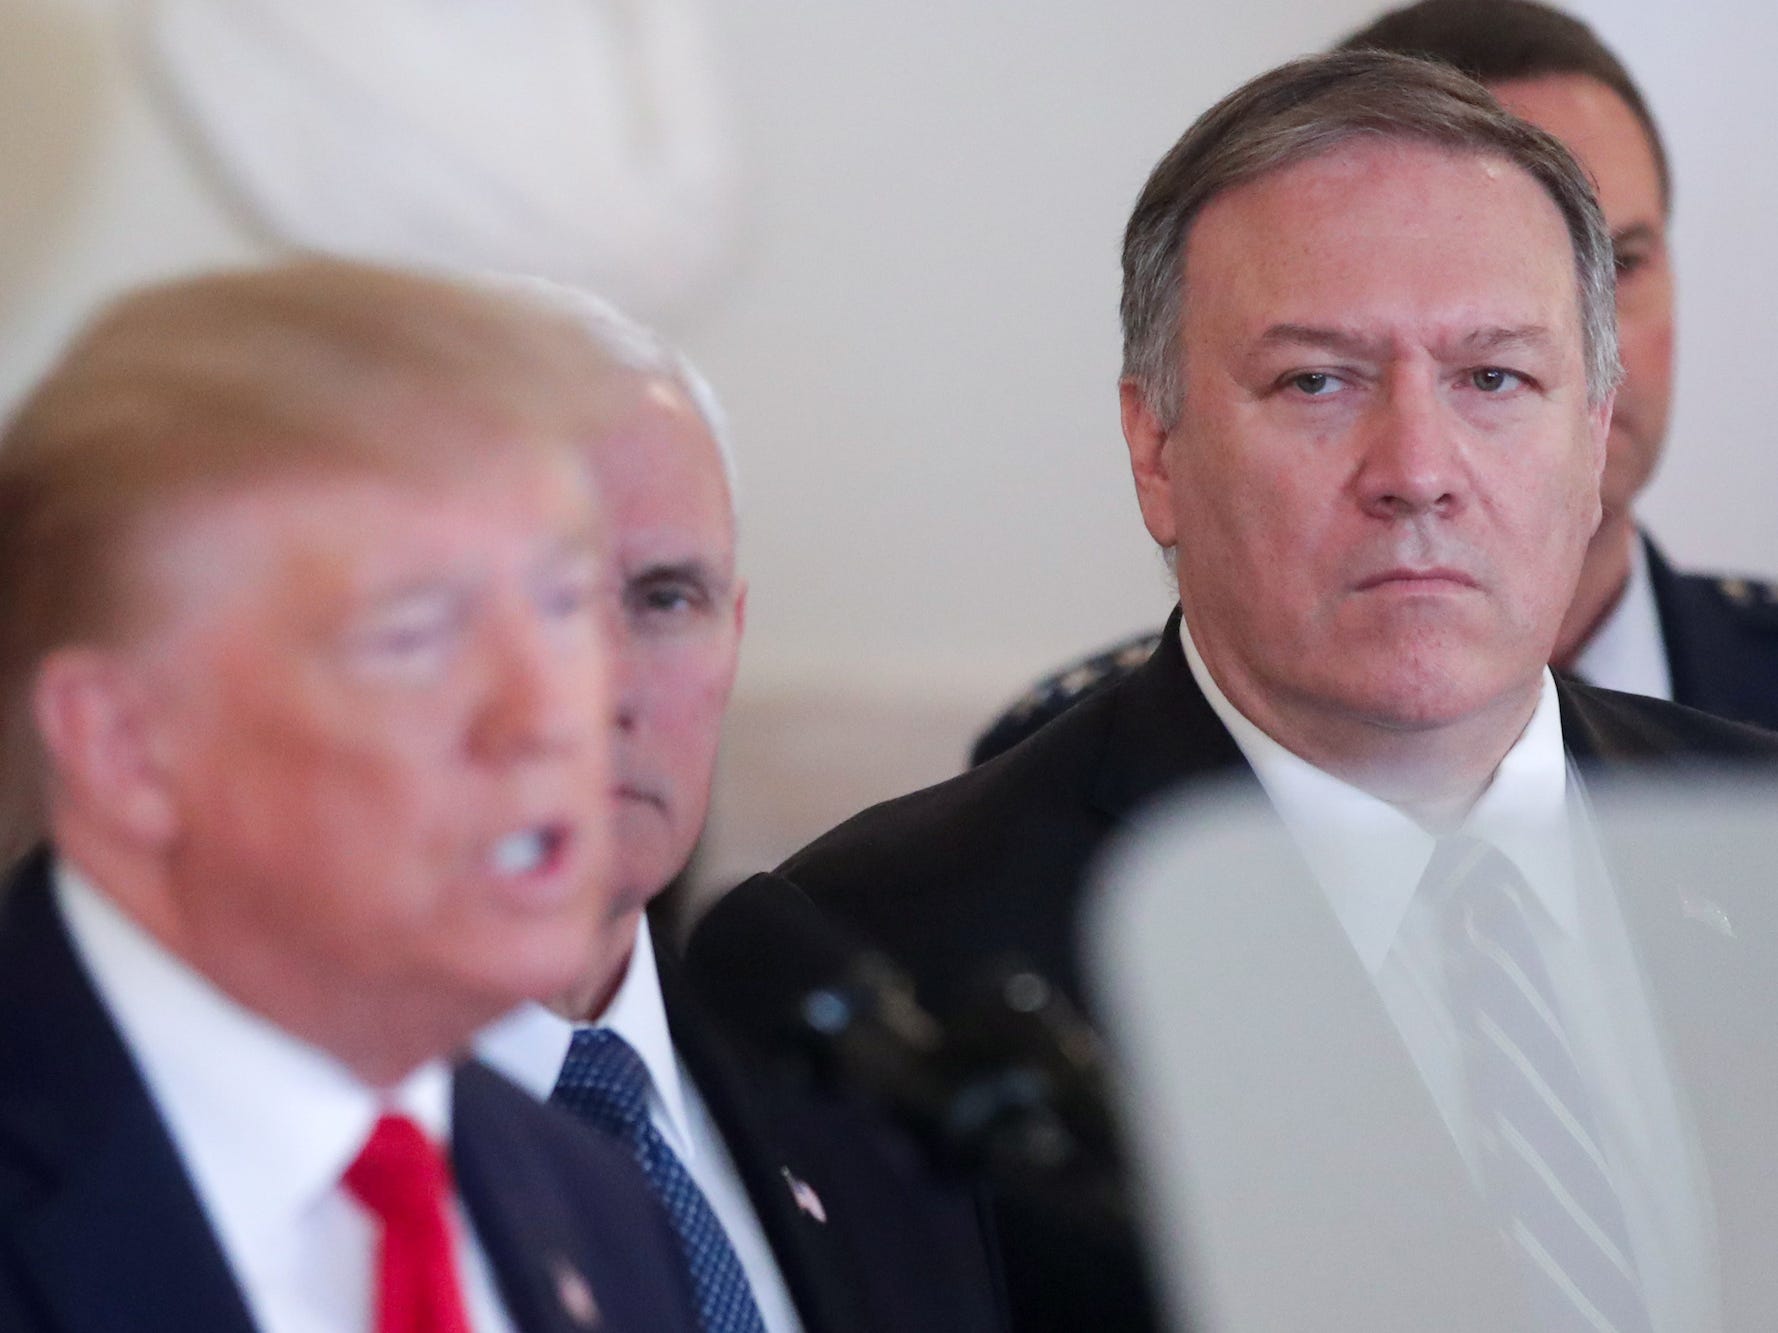 Mike Pompeo looks on as Trump speaks at the White House on January 8, 2020.